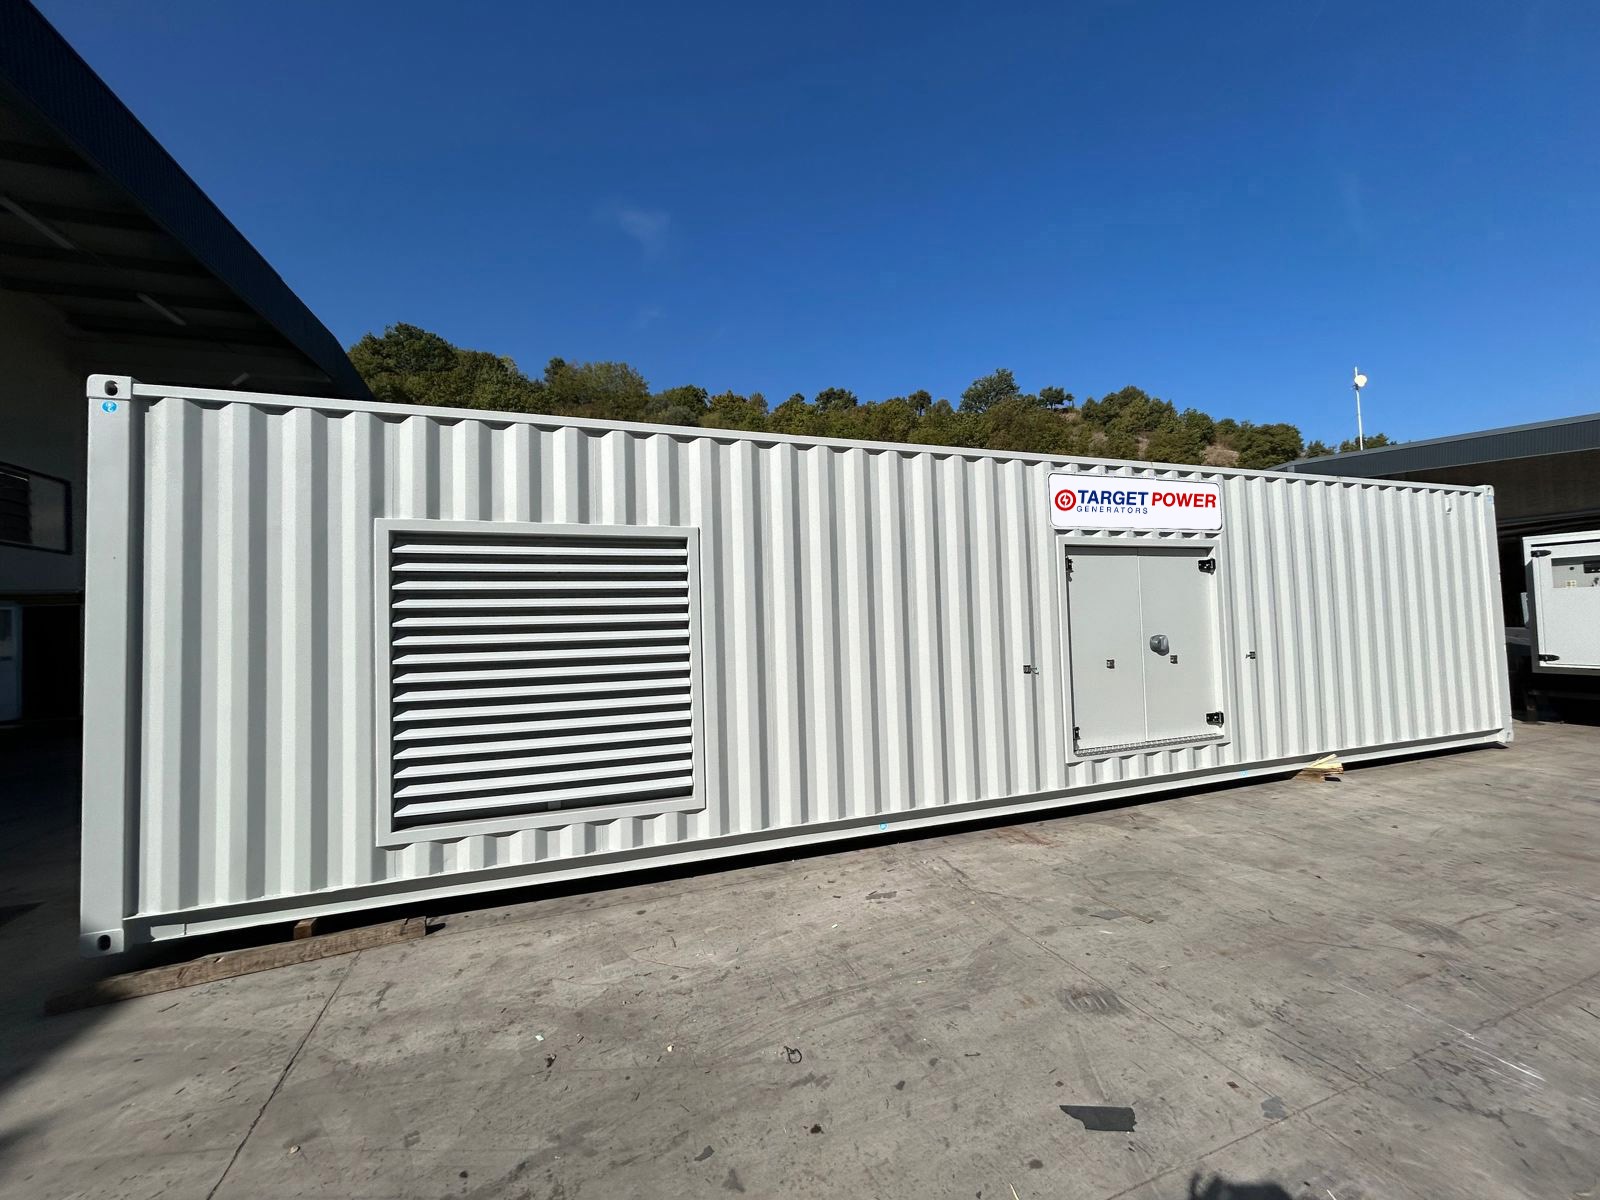 A containerized diesel generator by Target Power Generators UK, demonstrating their expertise in providing reliable power solutions in a compact and efficient package